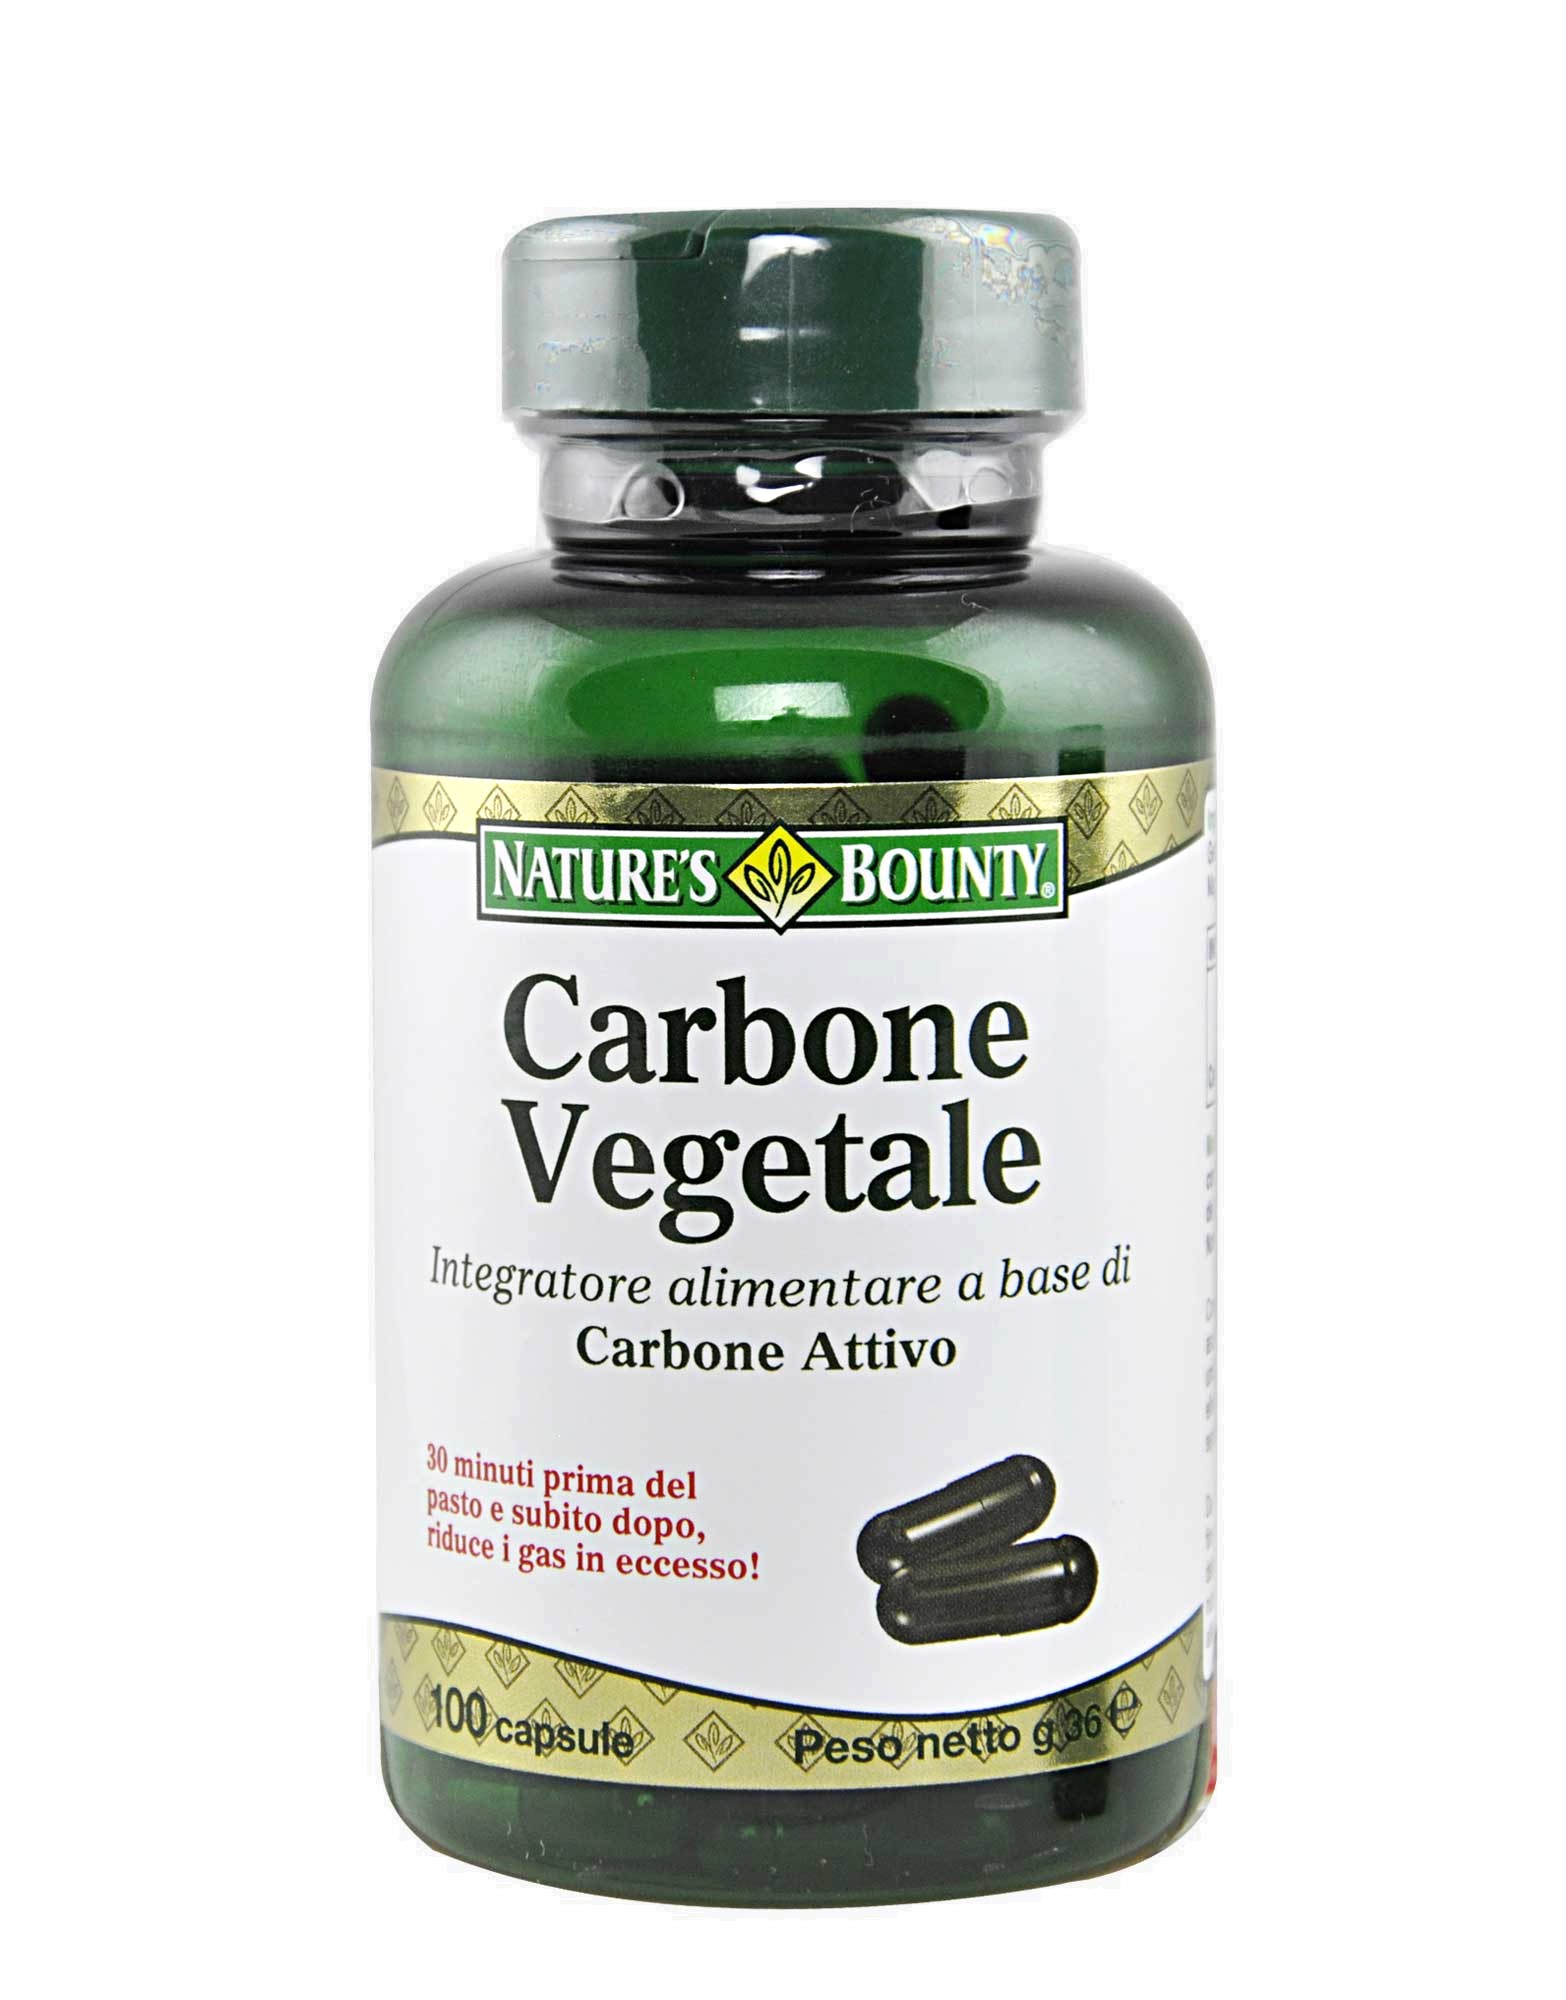 Carbone Vegetale by Nature's bounty, 100 capsules 